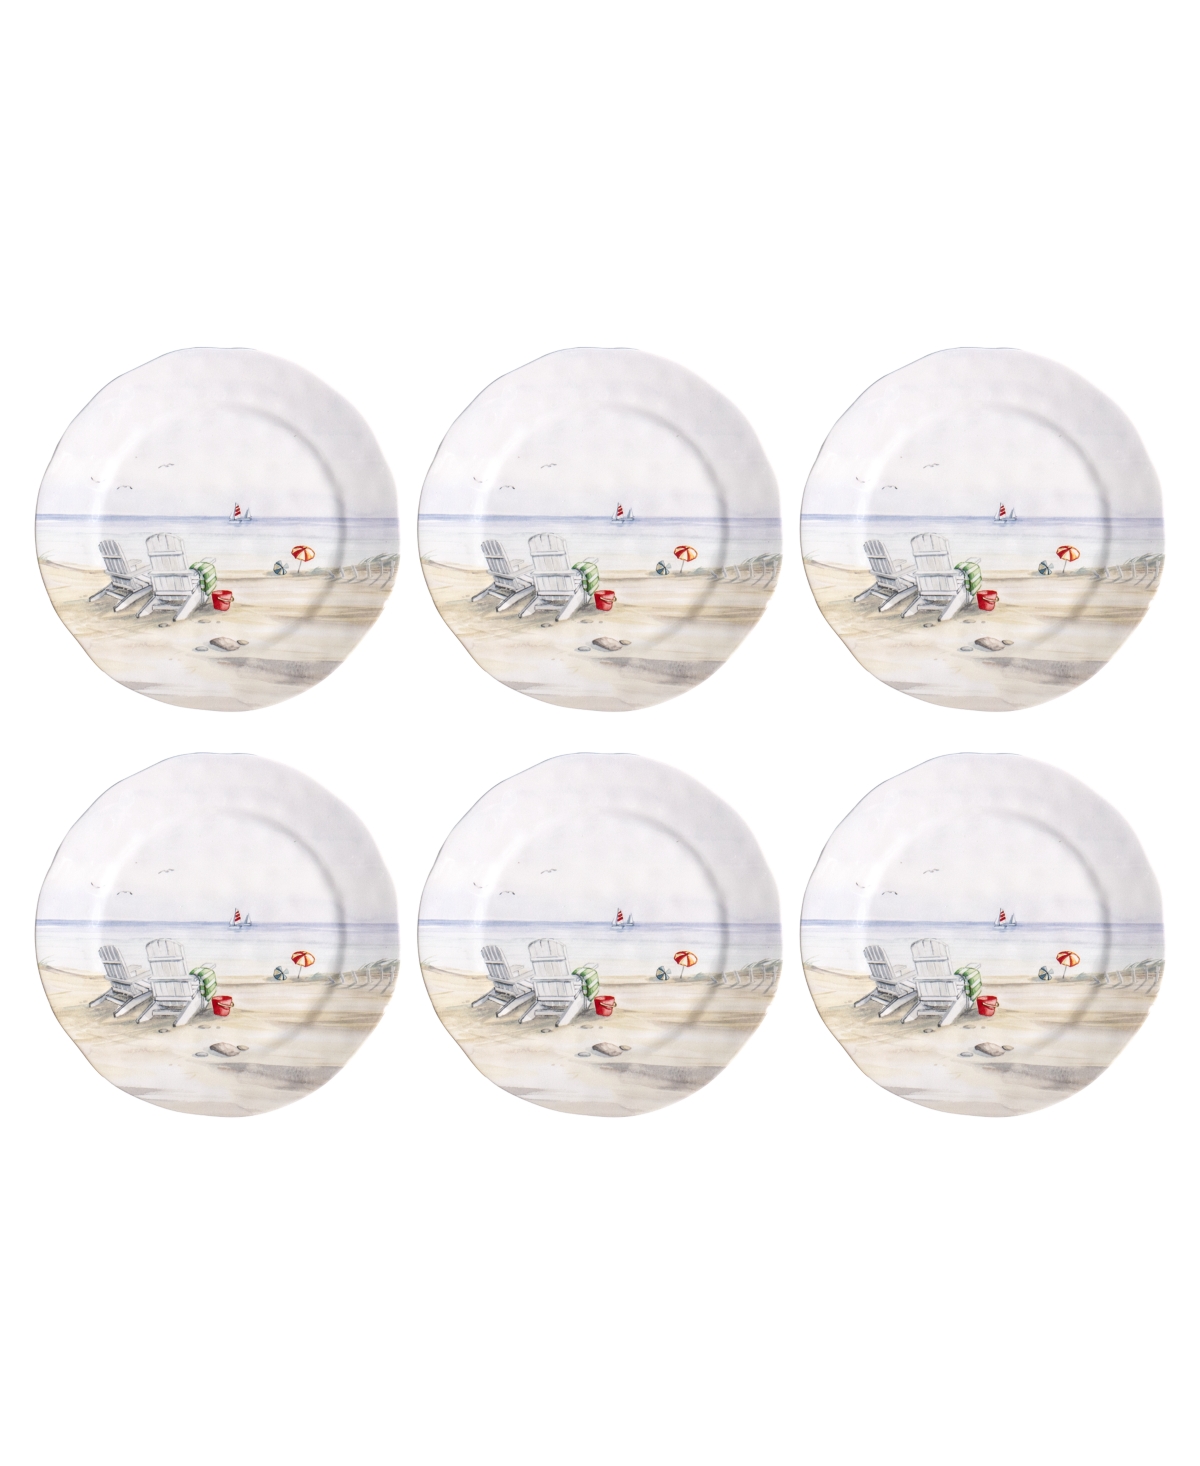 By the Shore 10.5" Dinner Plates, Set of 6, Service for 6 - White